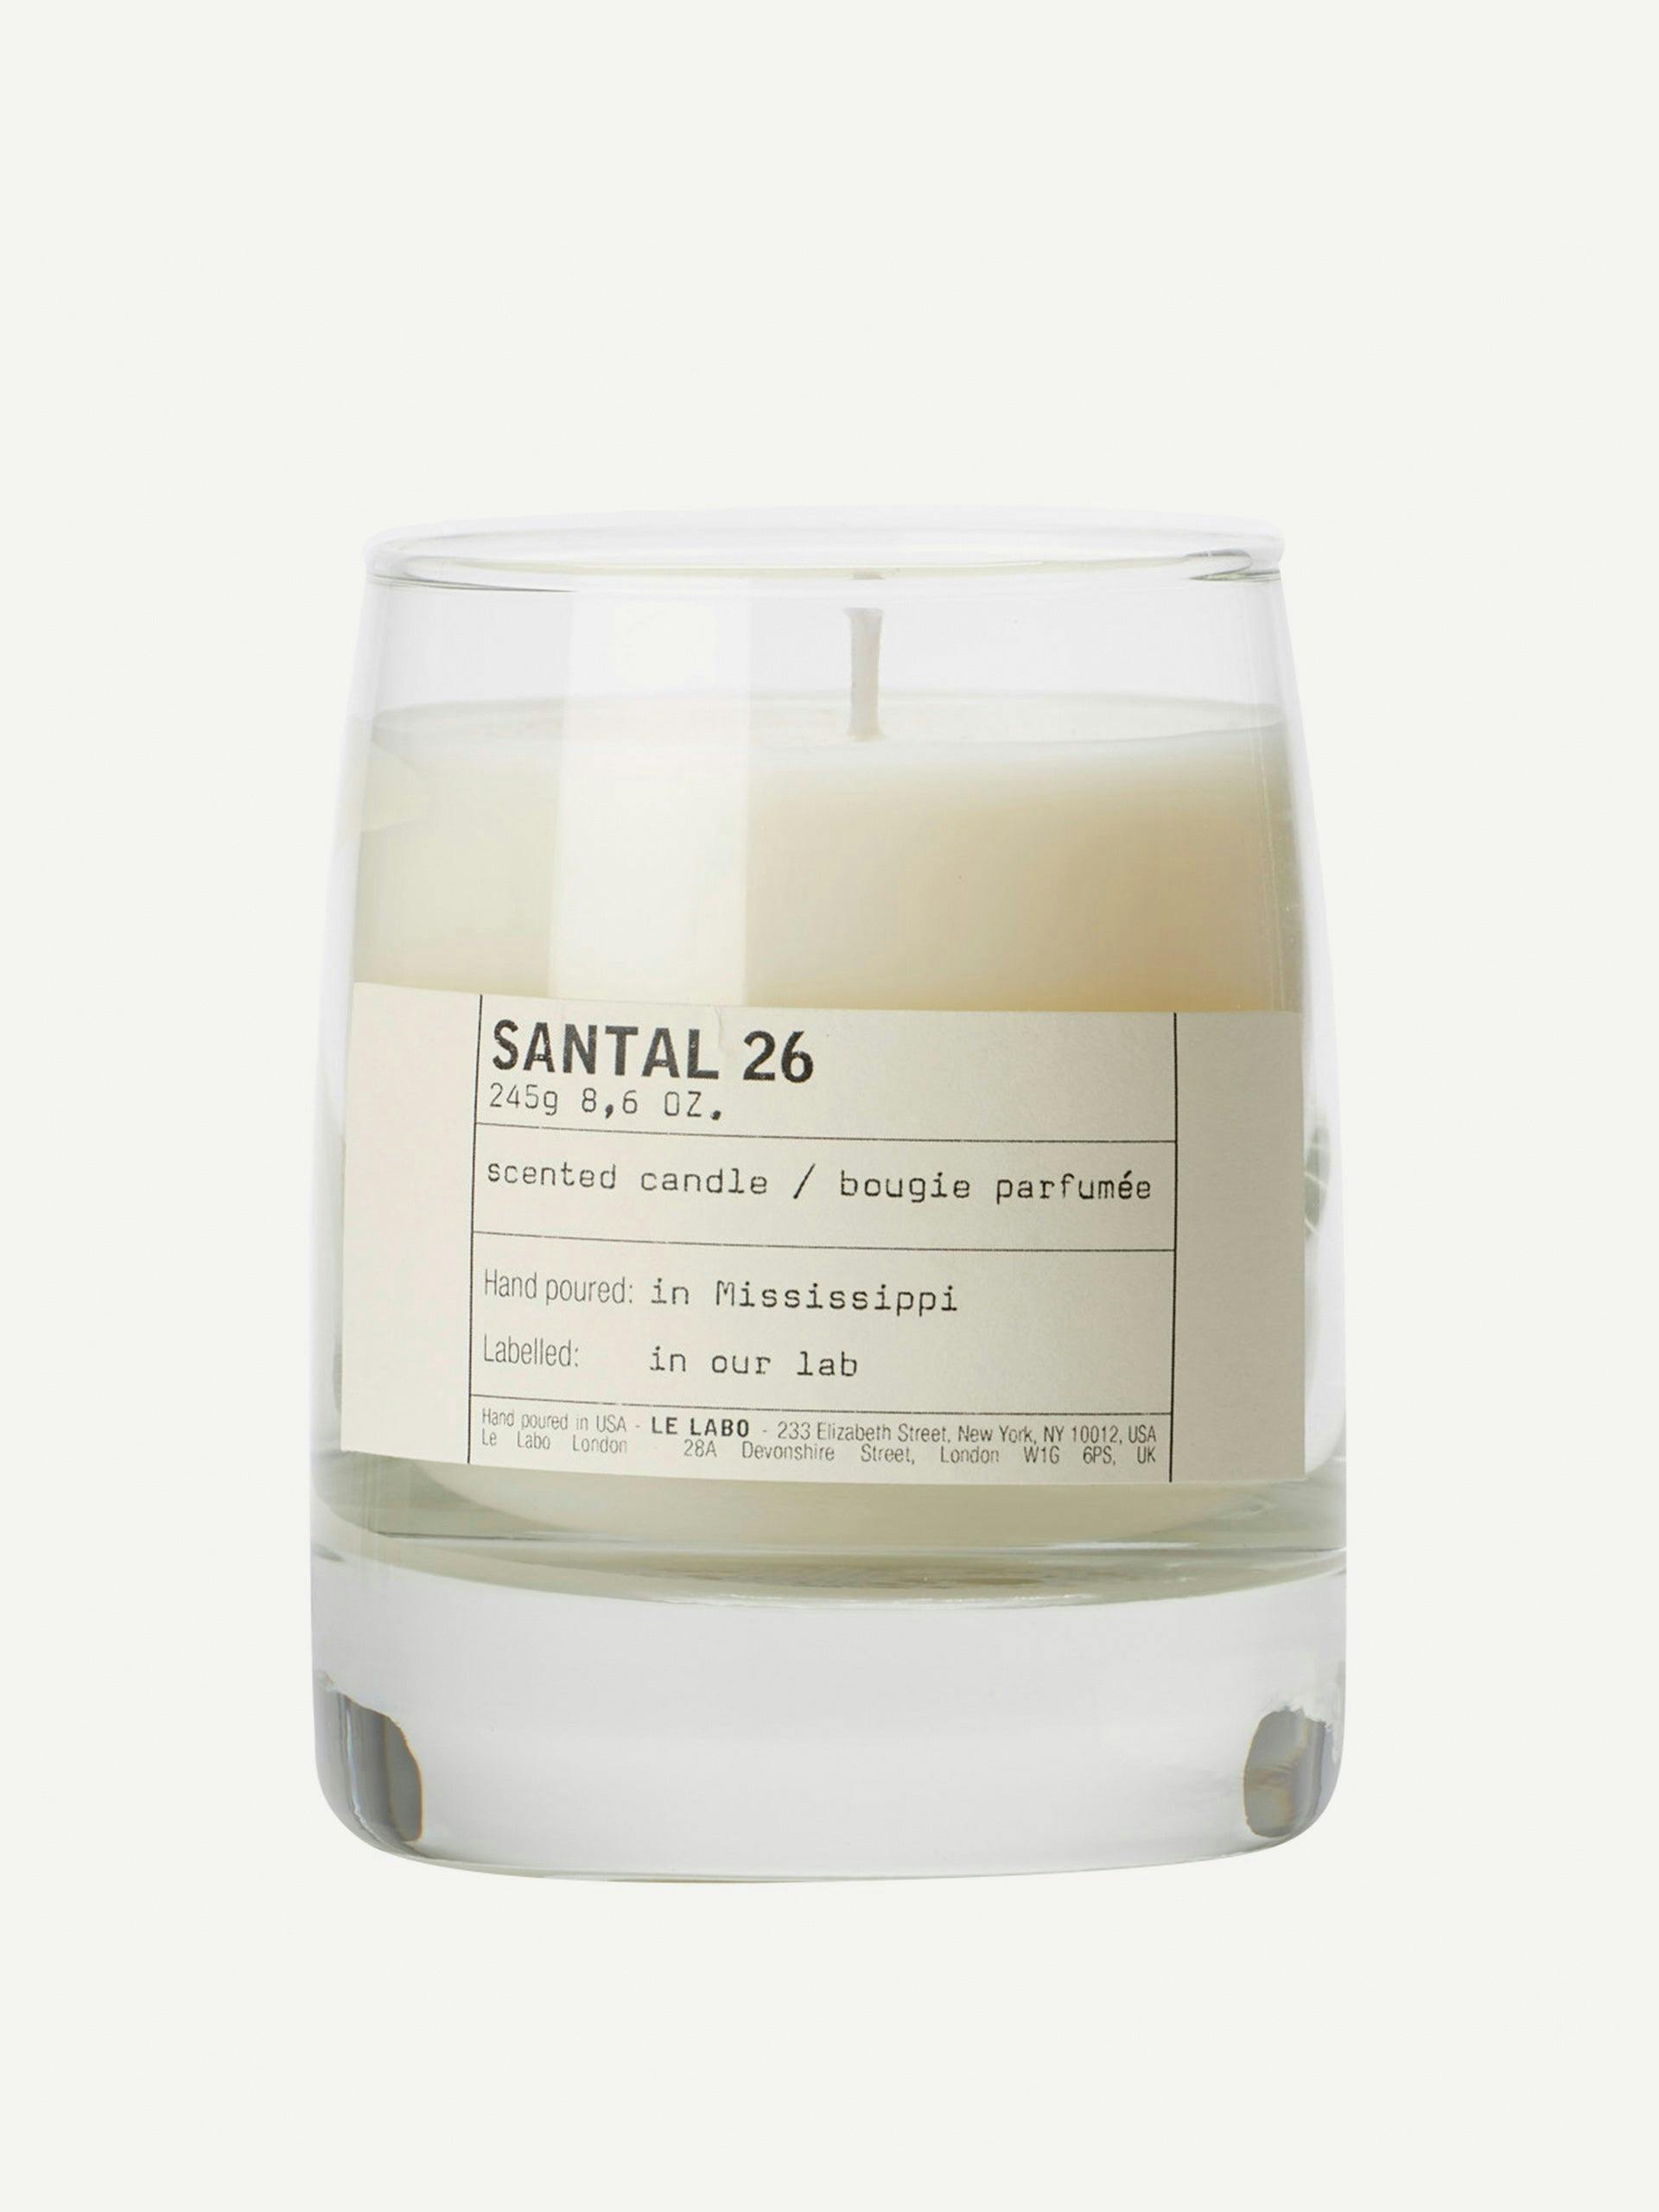 Santal 26 scented candle